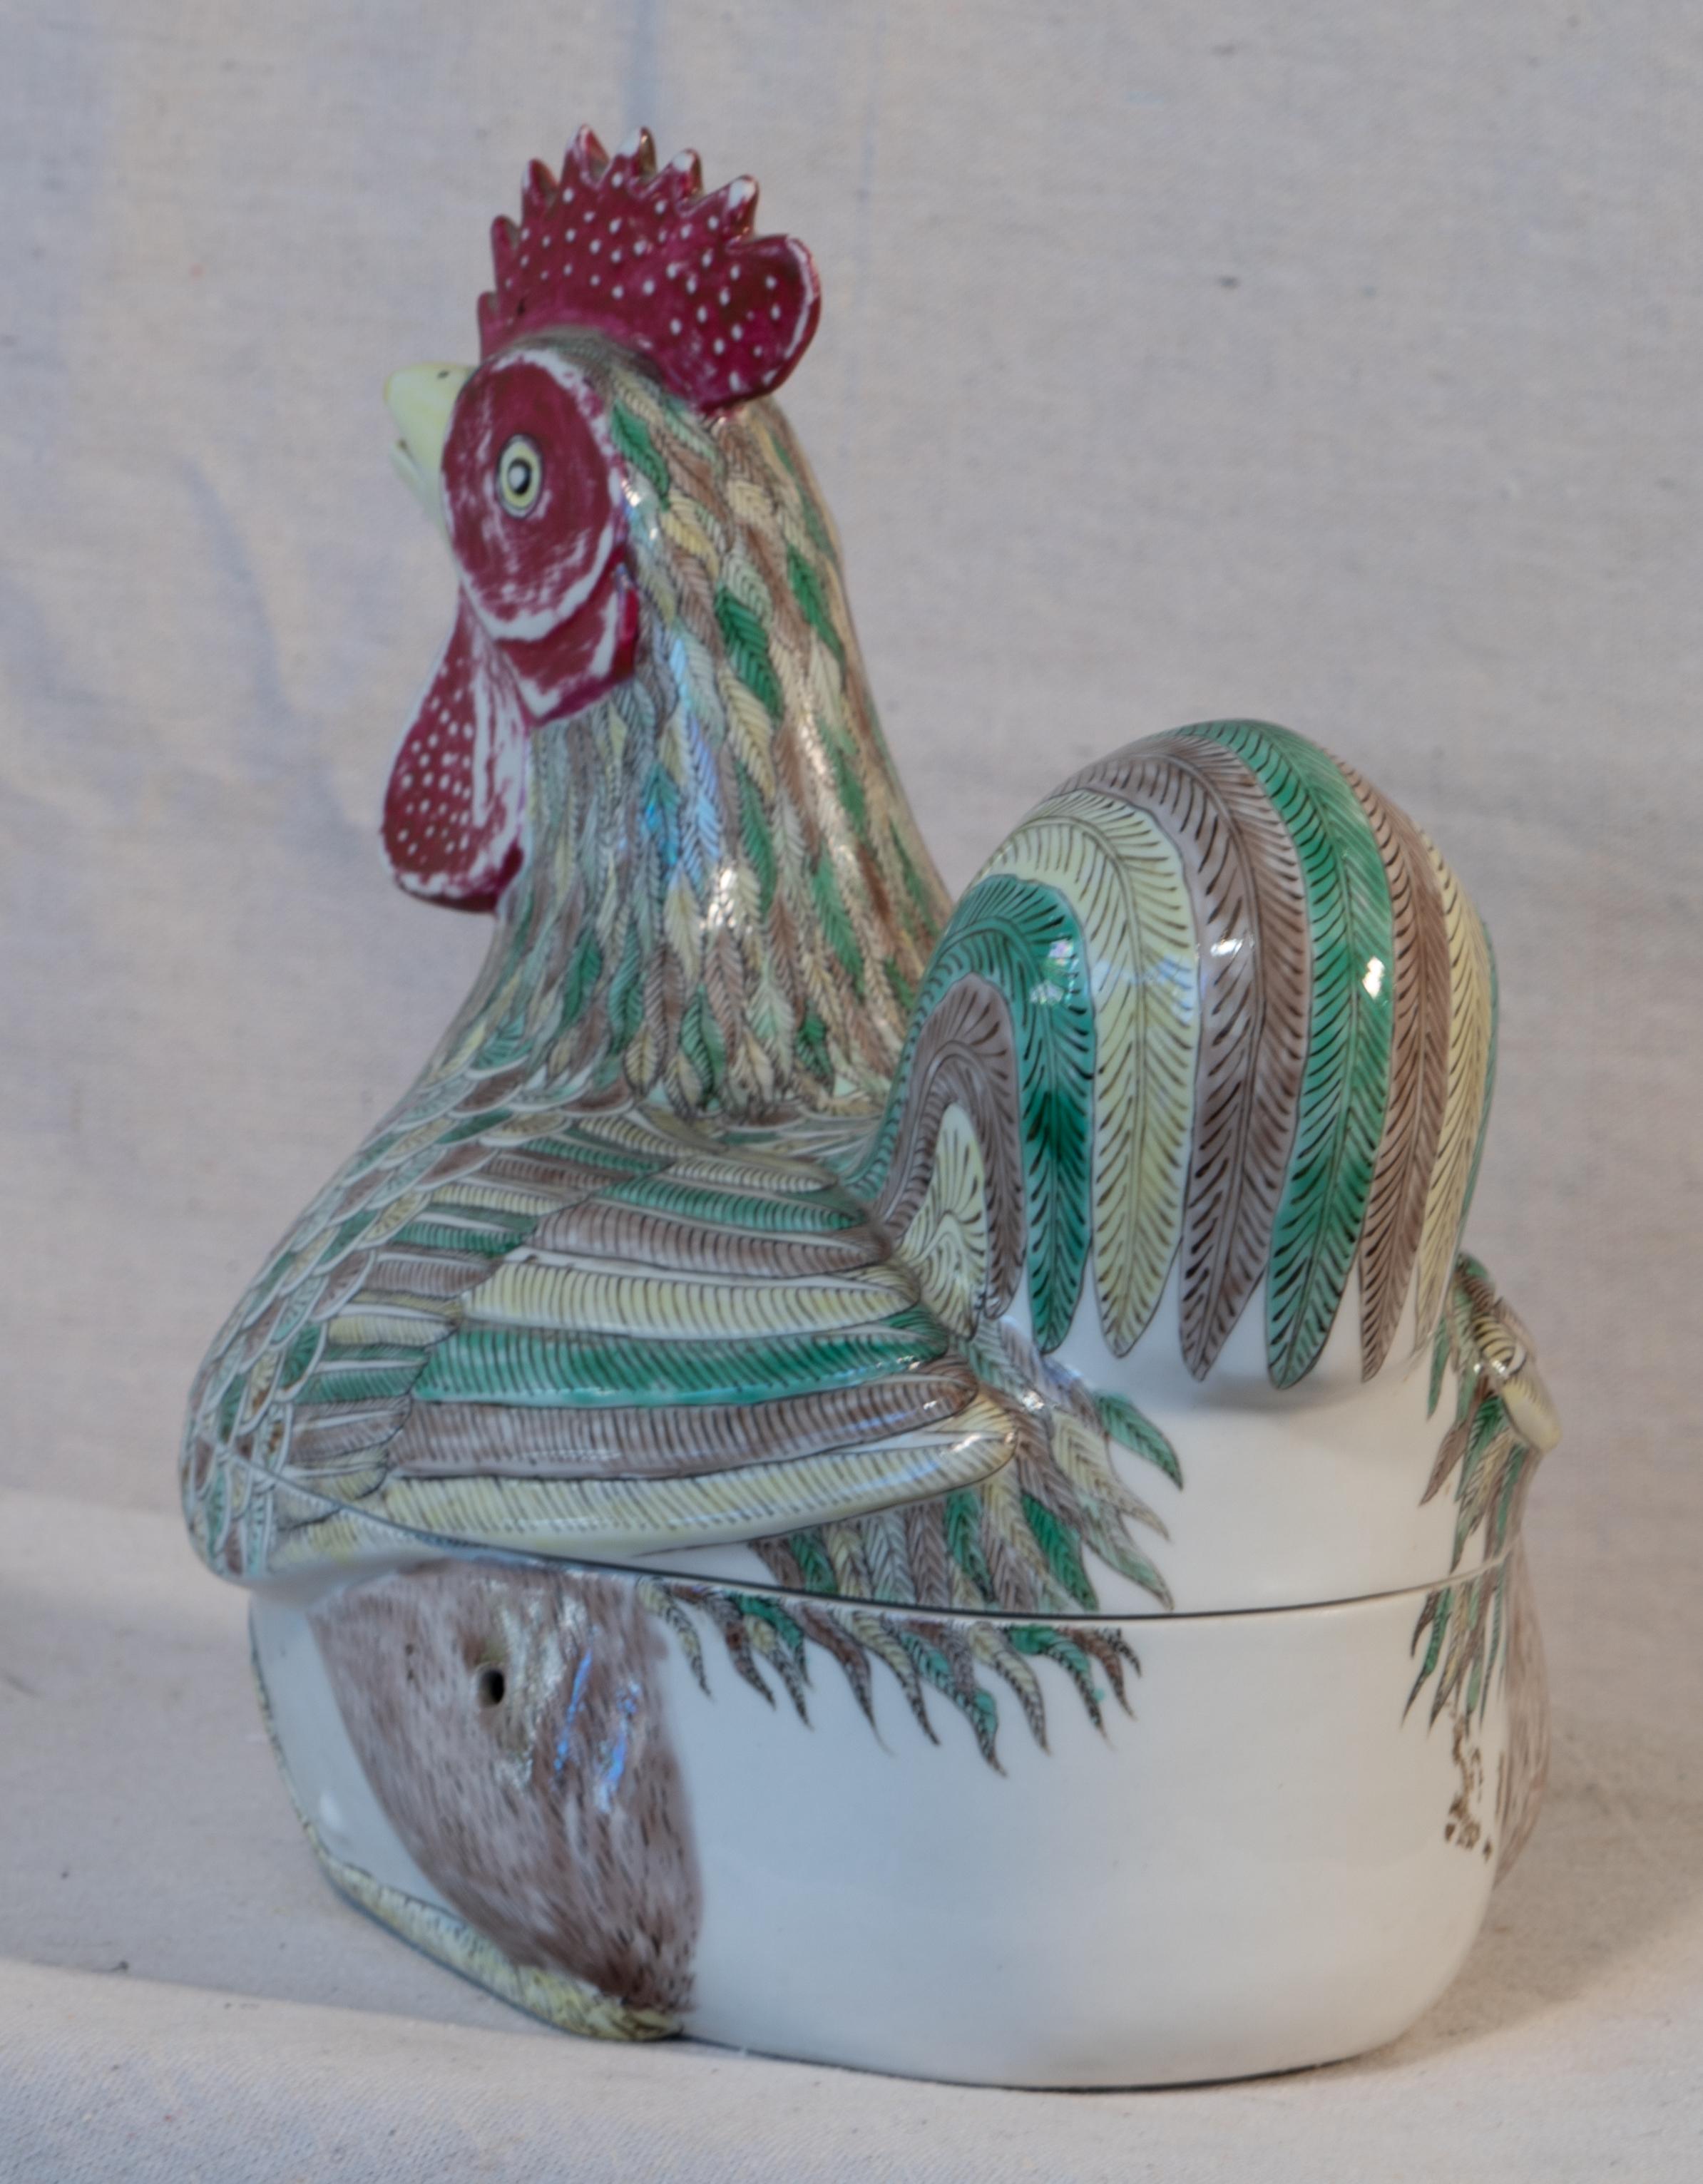 Chinese porcelain polychrome rooster form covered bowl.
Very good detail and separation of colors. Heavy porcelain body.
Mid-20th century.